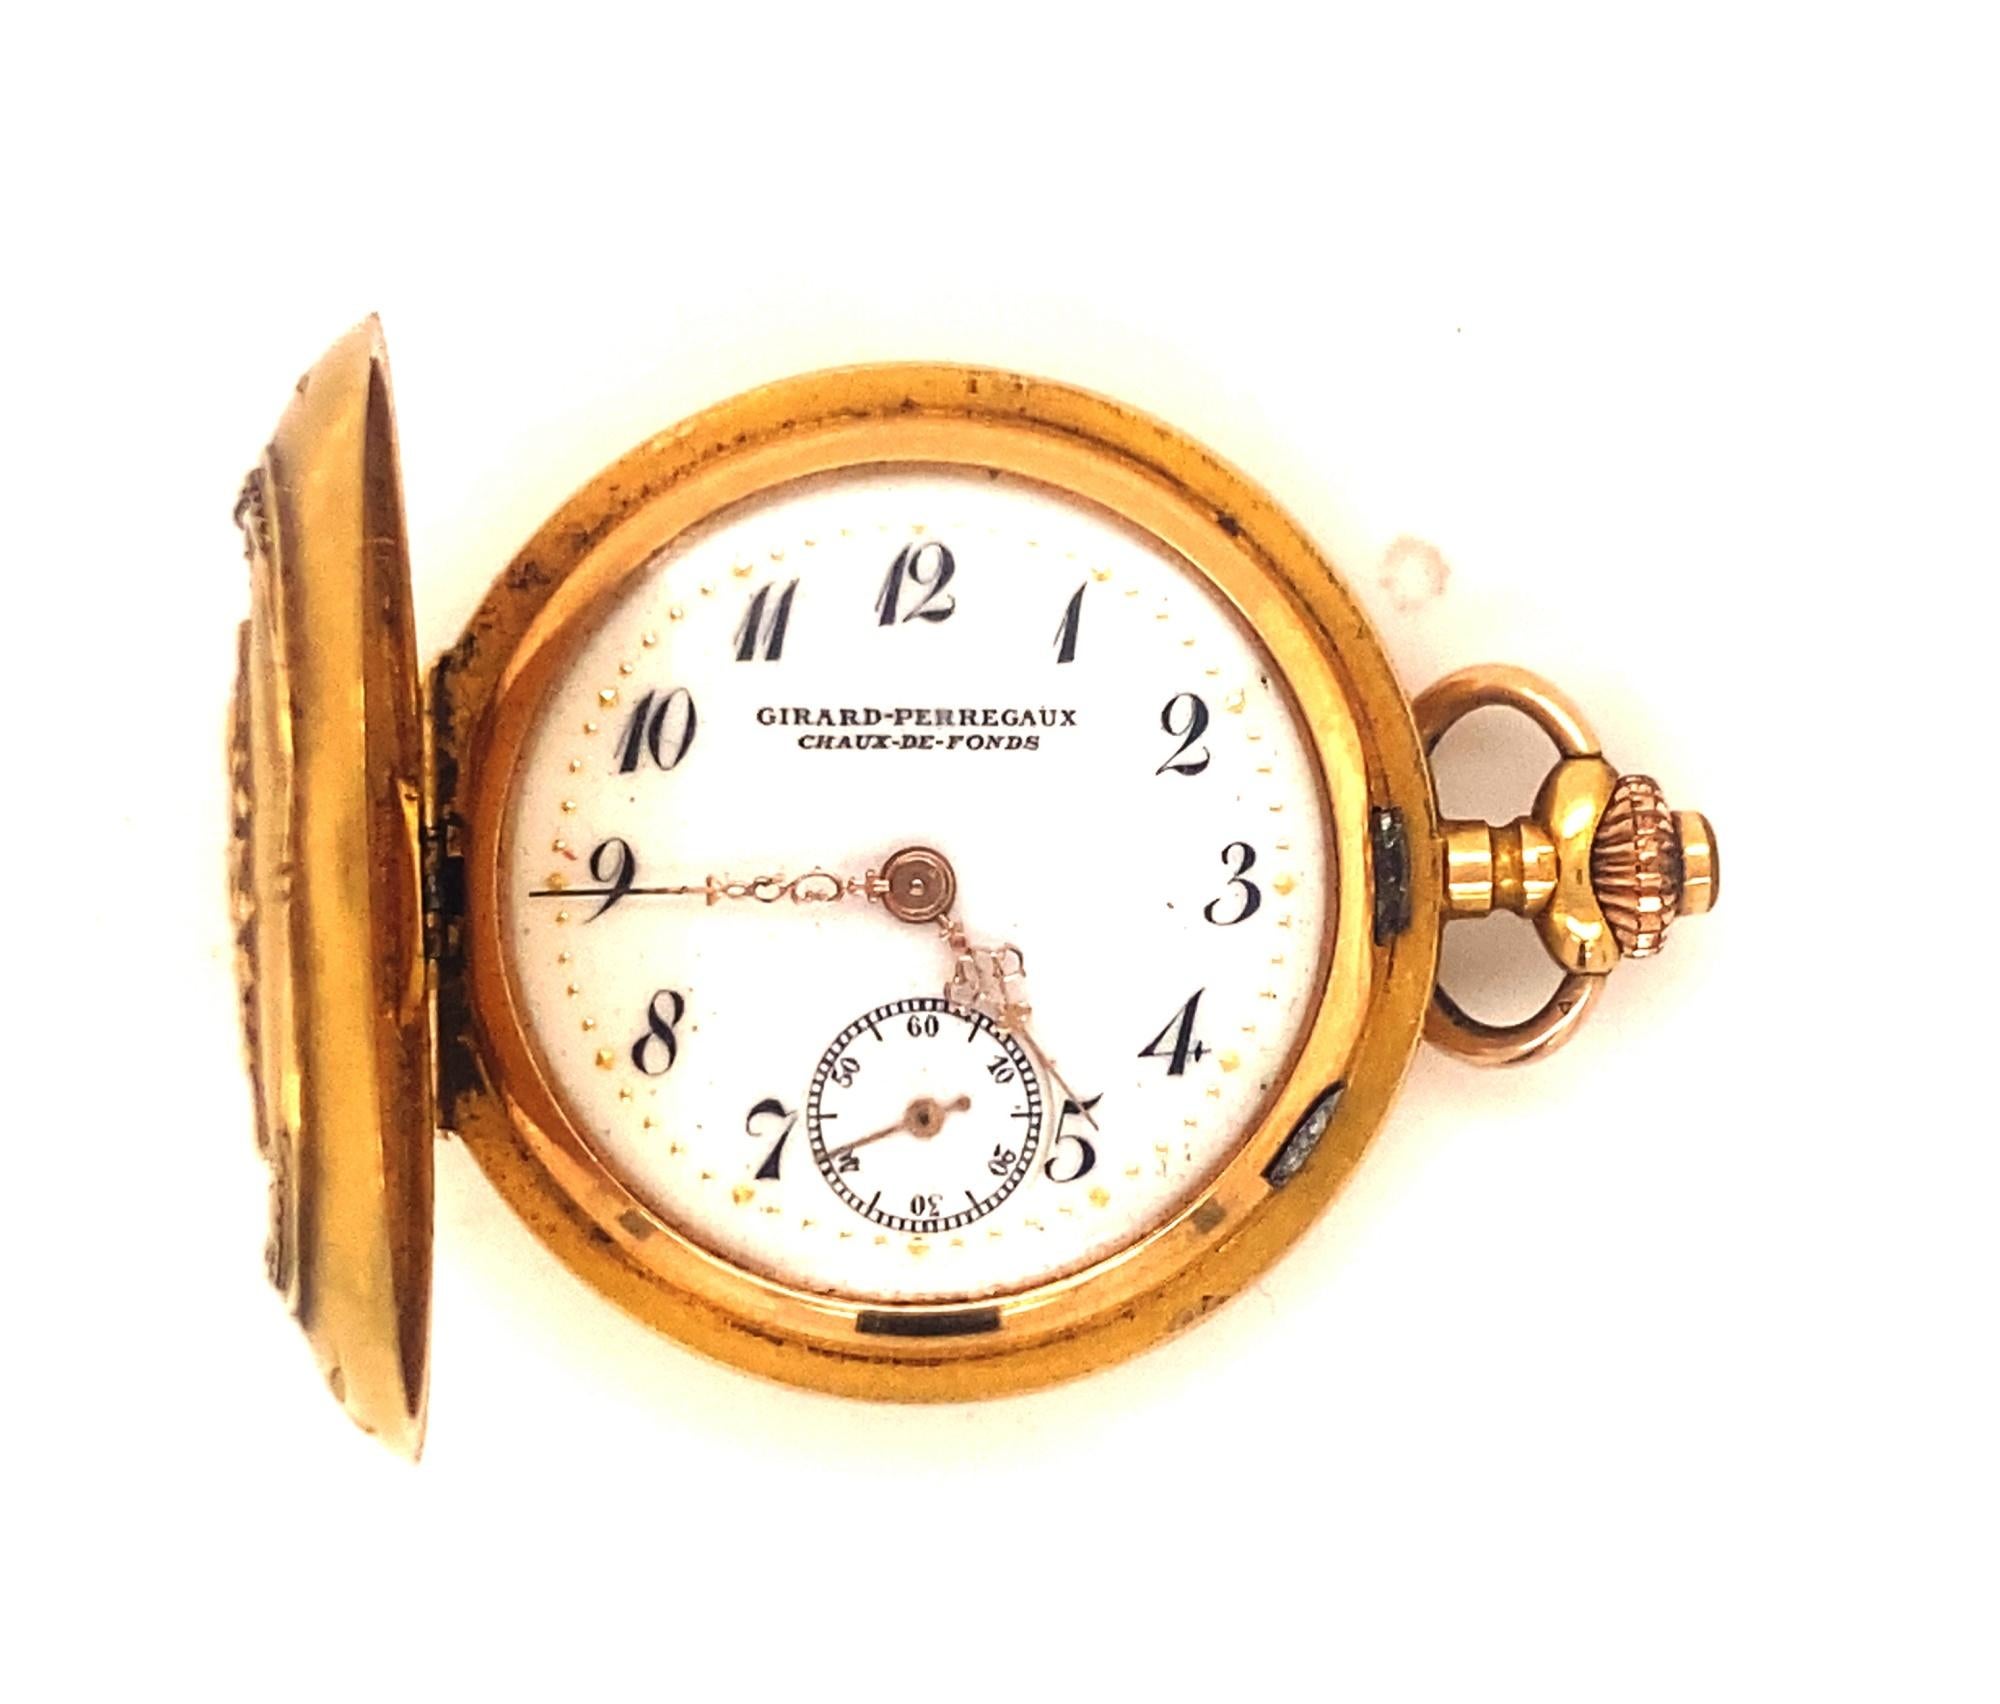 This is a beautiful antique art nouveau ladies hunter case pendant watch c.1900.  The watch is in excellent working condition.  The watch Art Nouveau design with a bouquet of flowers and rose cut diamonds.  Marked 18K inside Girad-Perregaux Hors